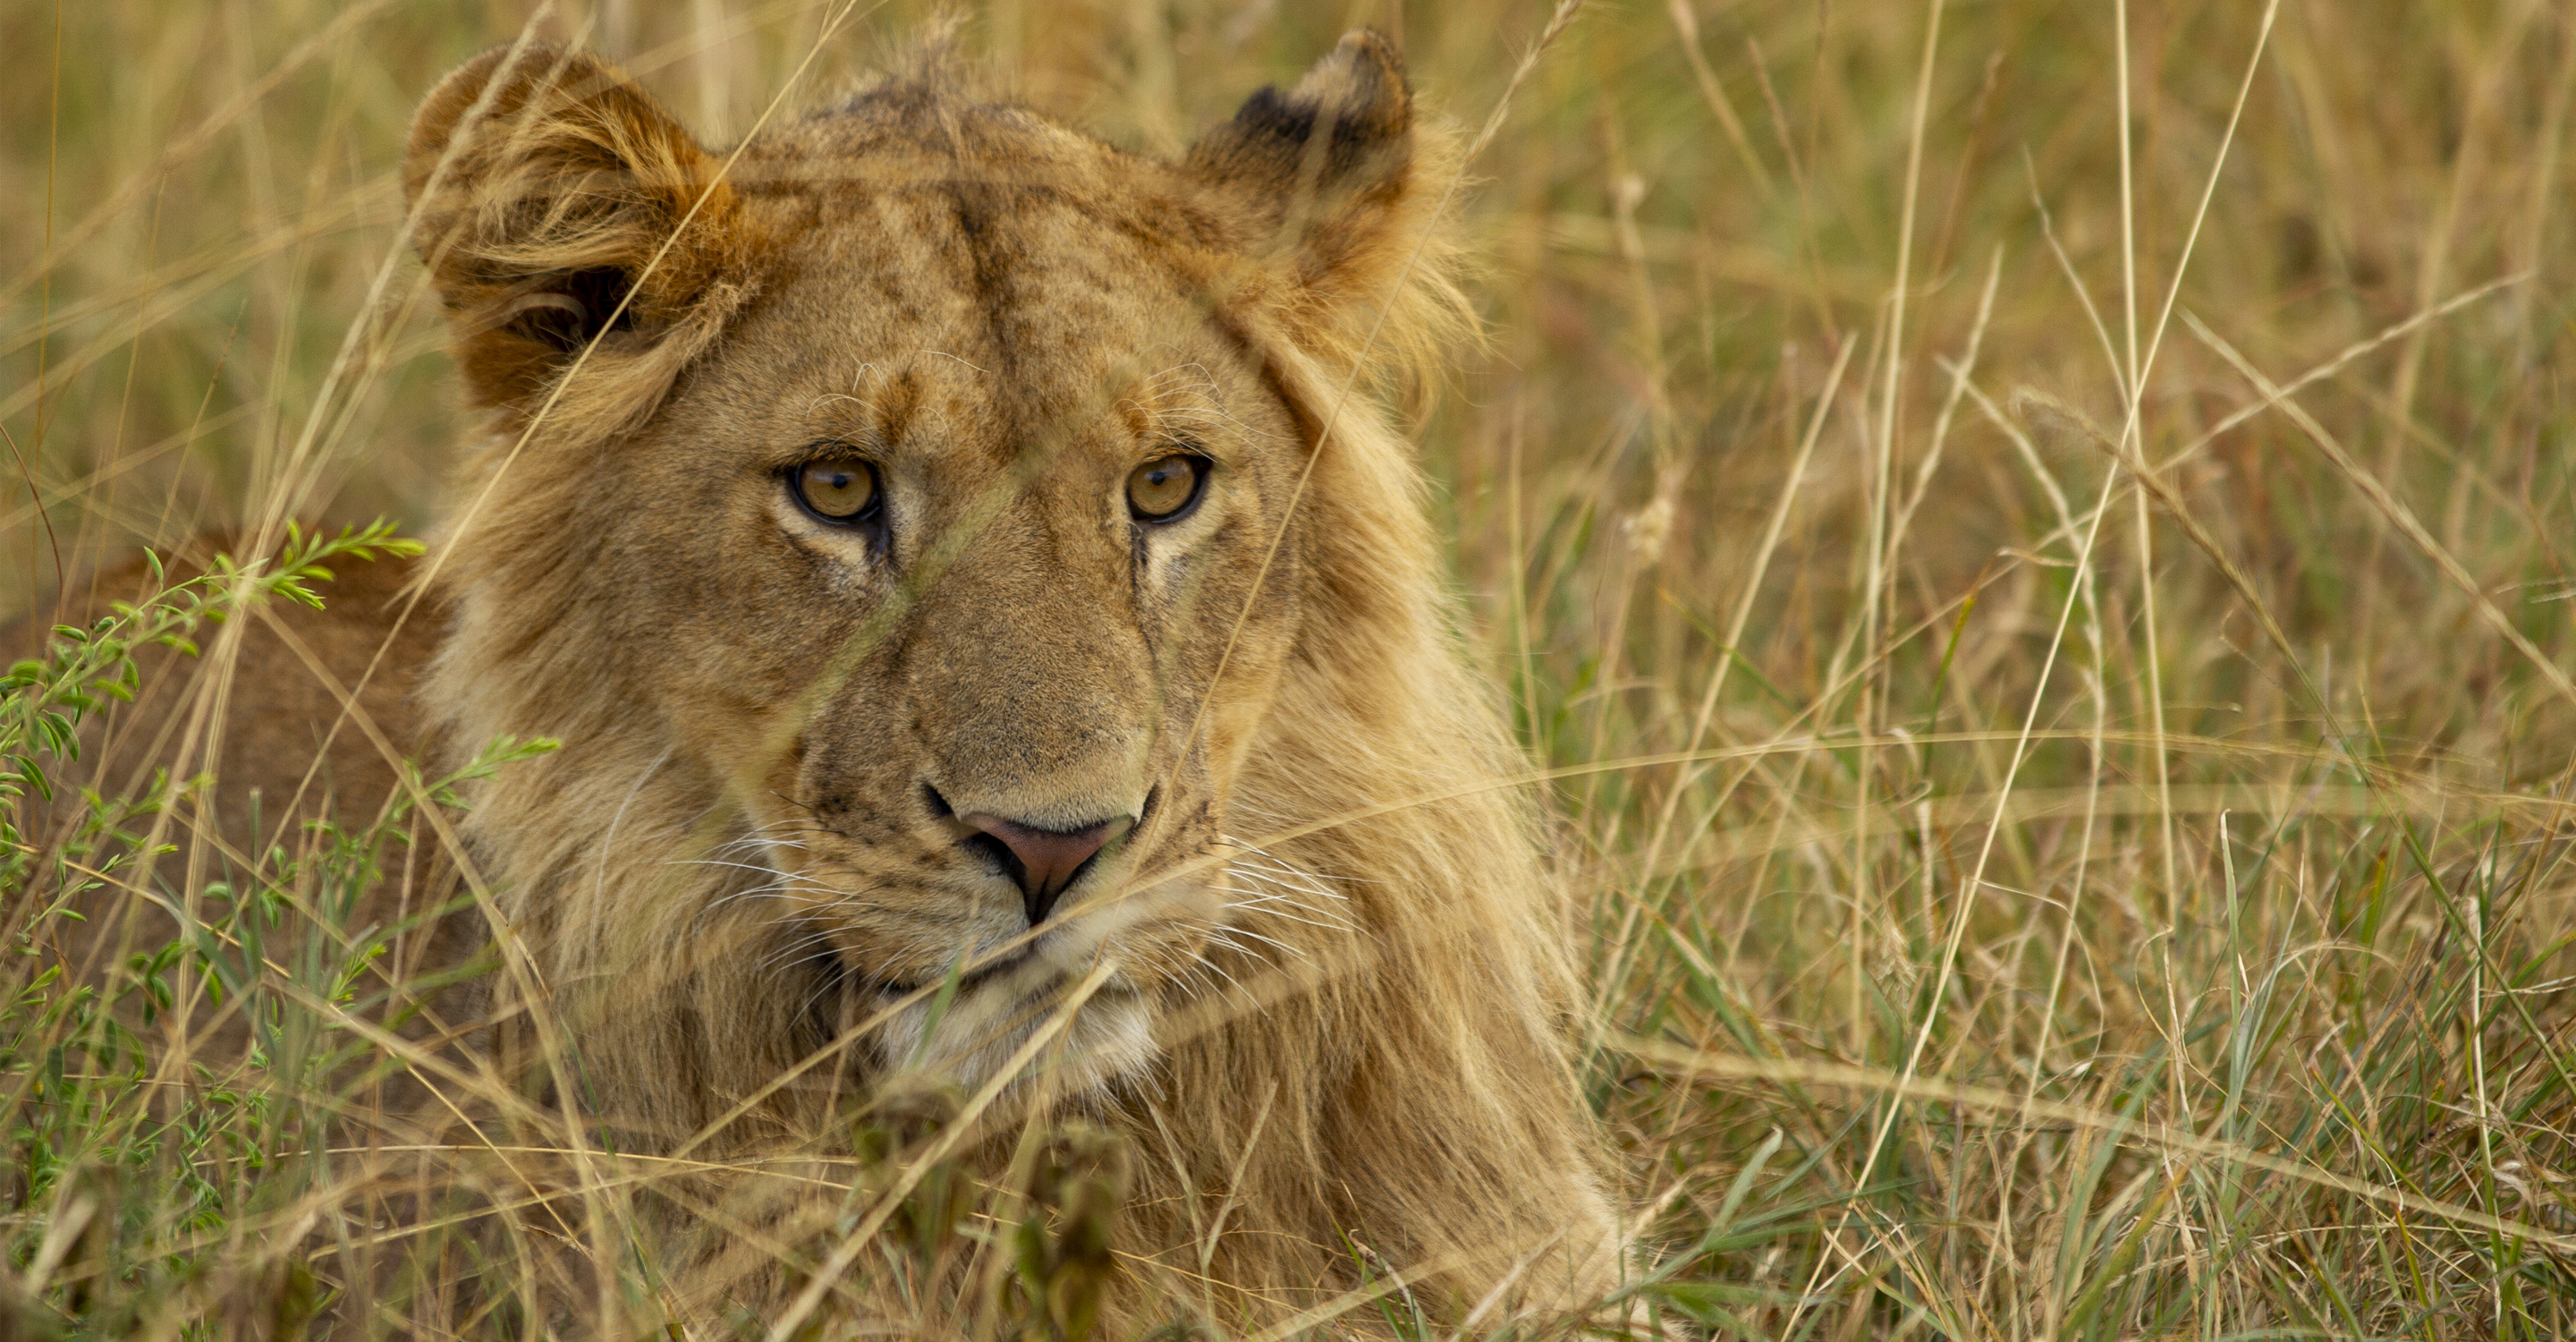 A young African lion rests in the tall grass in the Maasai Mara National Reserve, Kenya